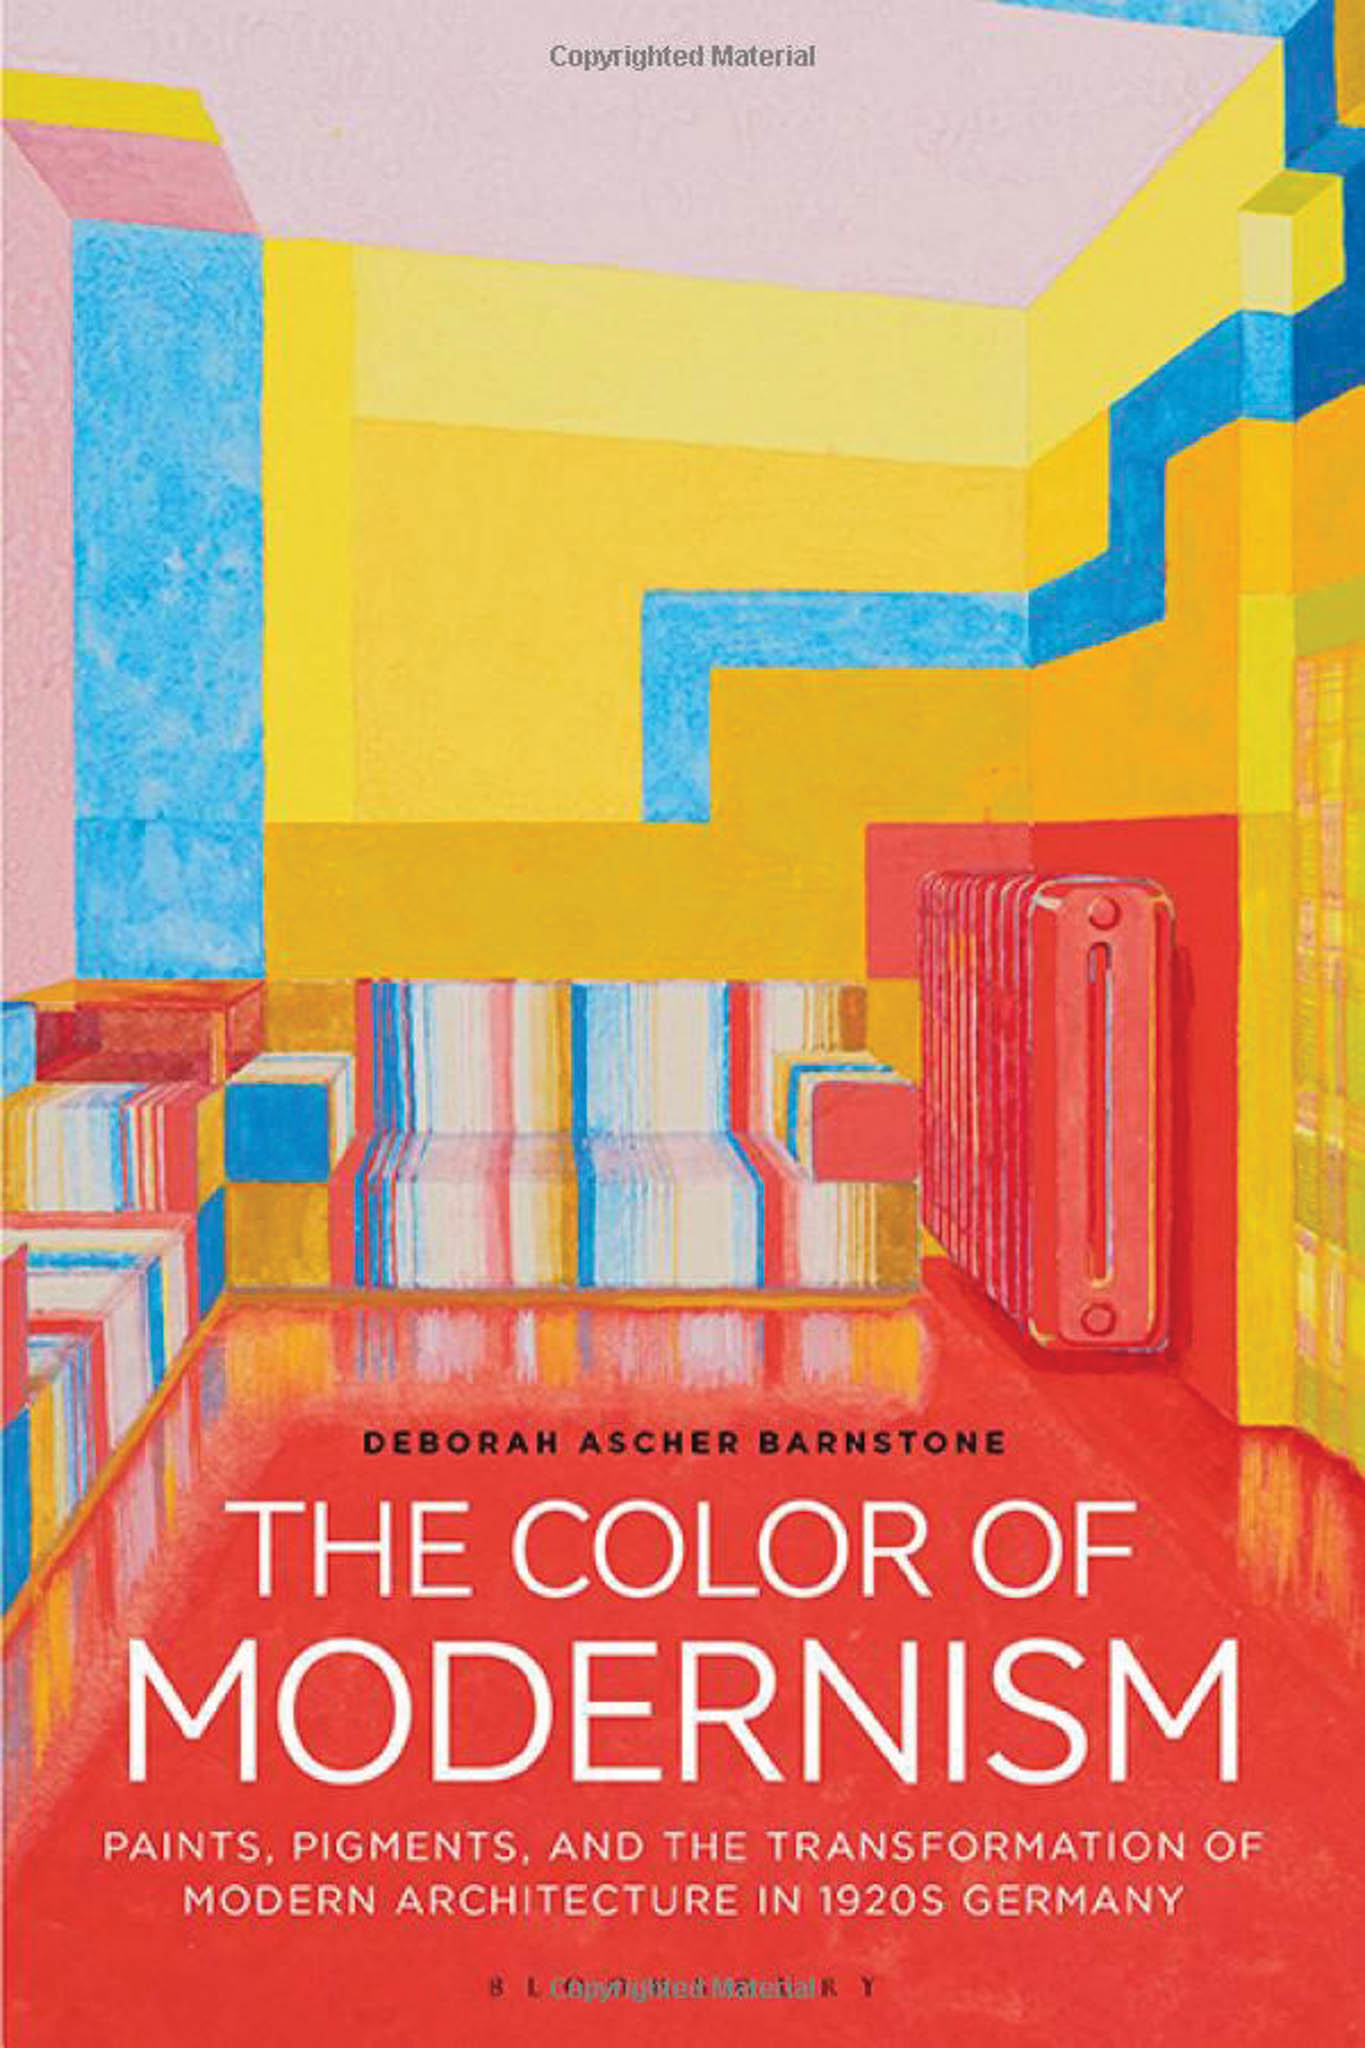 The Color of Modernism book cover